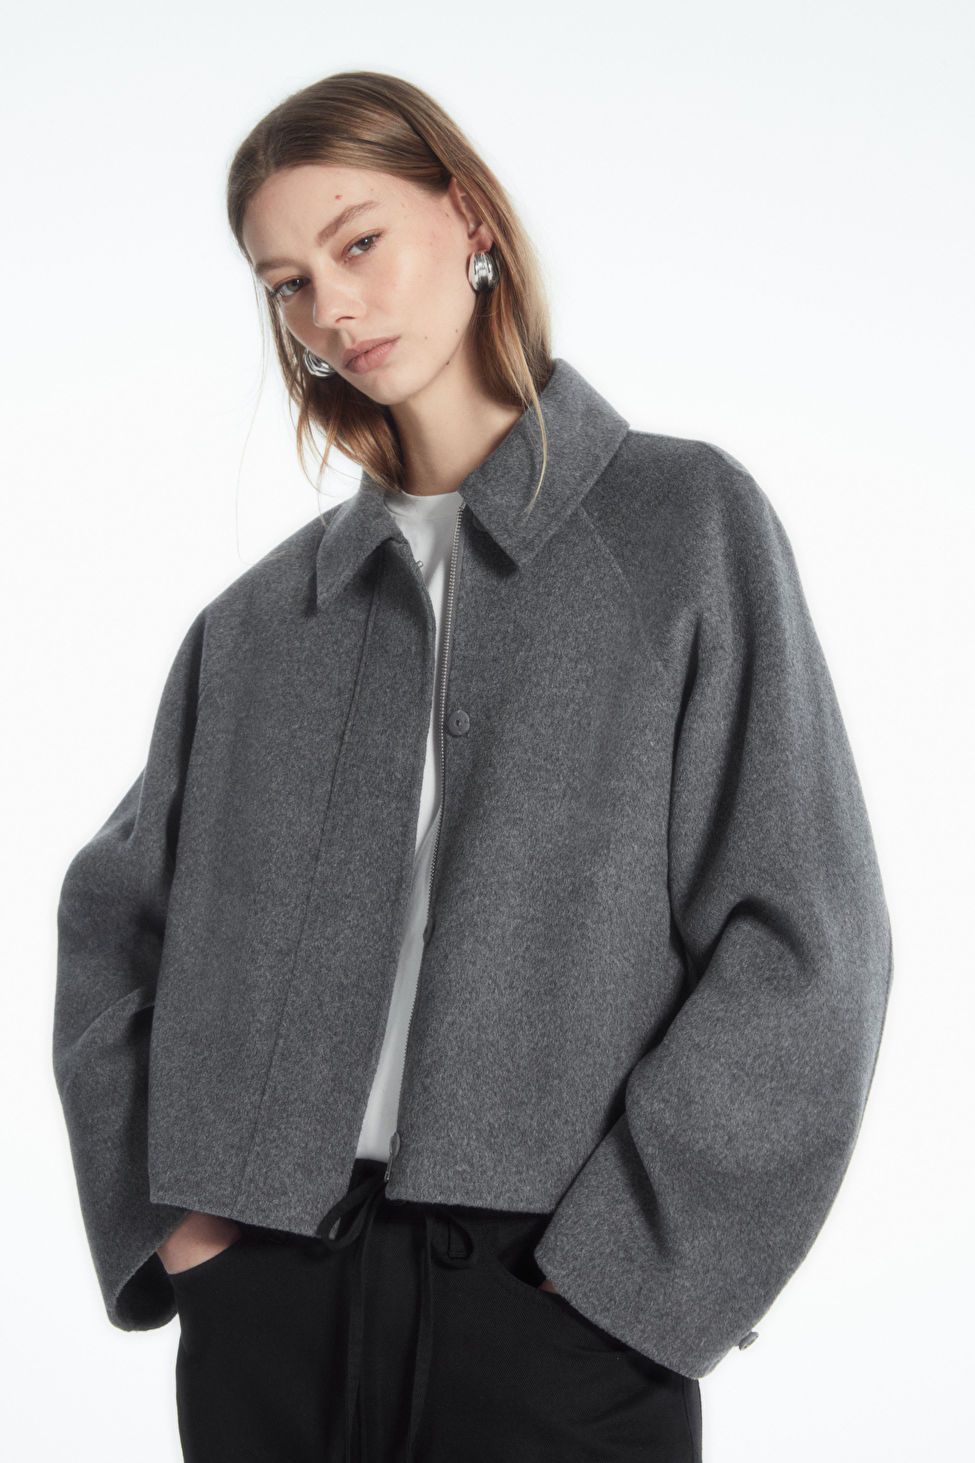 SHORT DOUBLE-FACED WOOL JACKET | COS UK